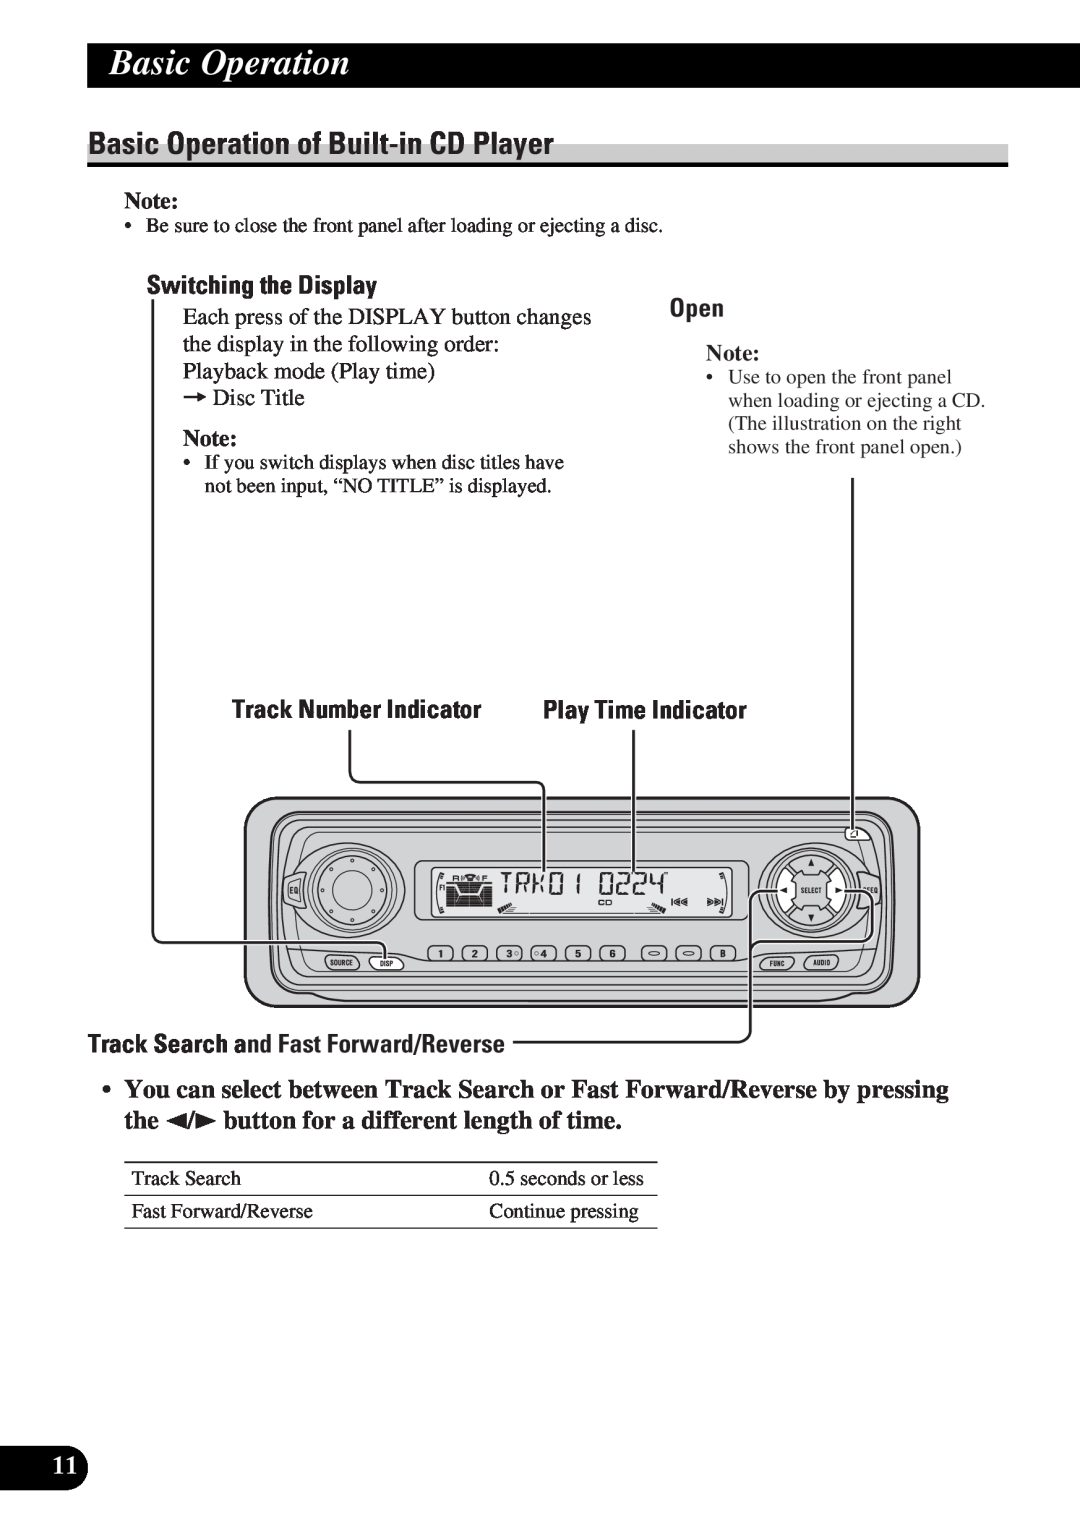 Pioneer DEH-P4300 Basic Operation of Built-inCD Player, Switching the Display, Open, Track Number Indicator 